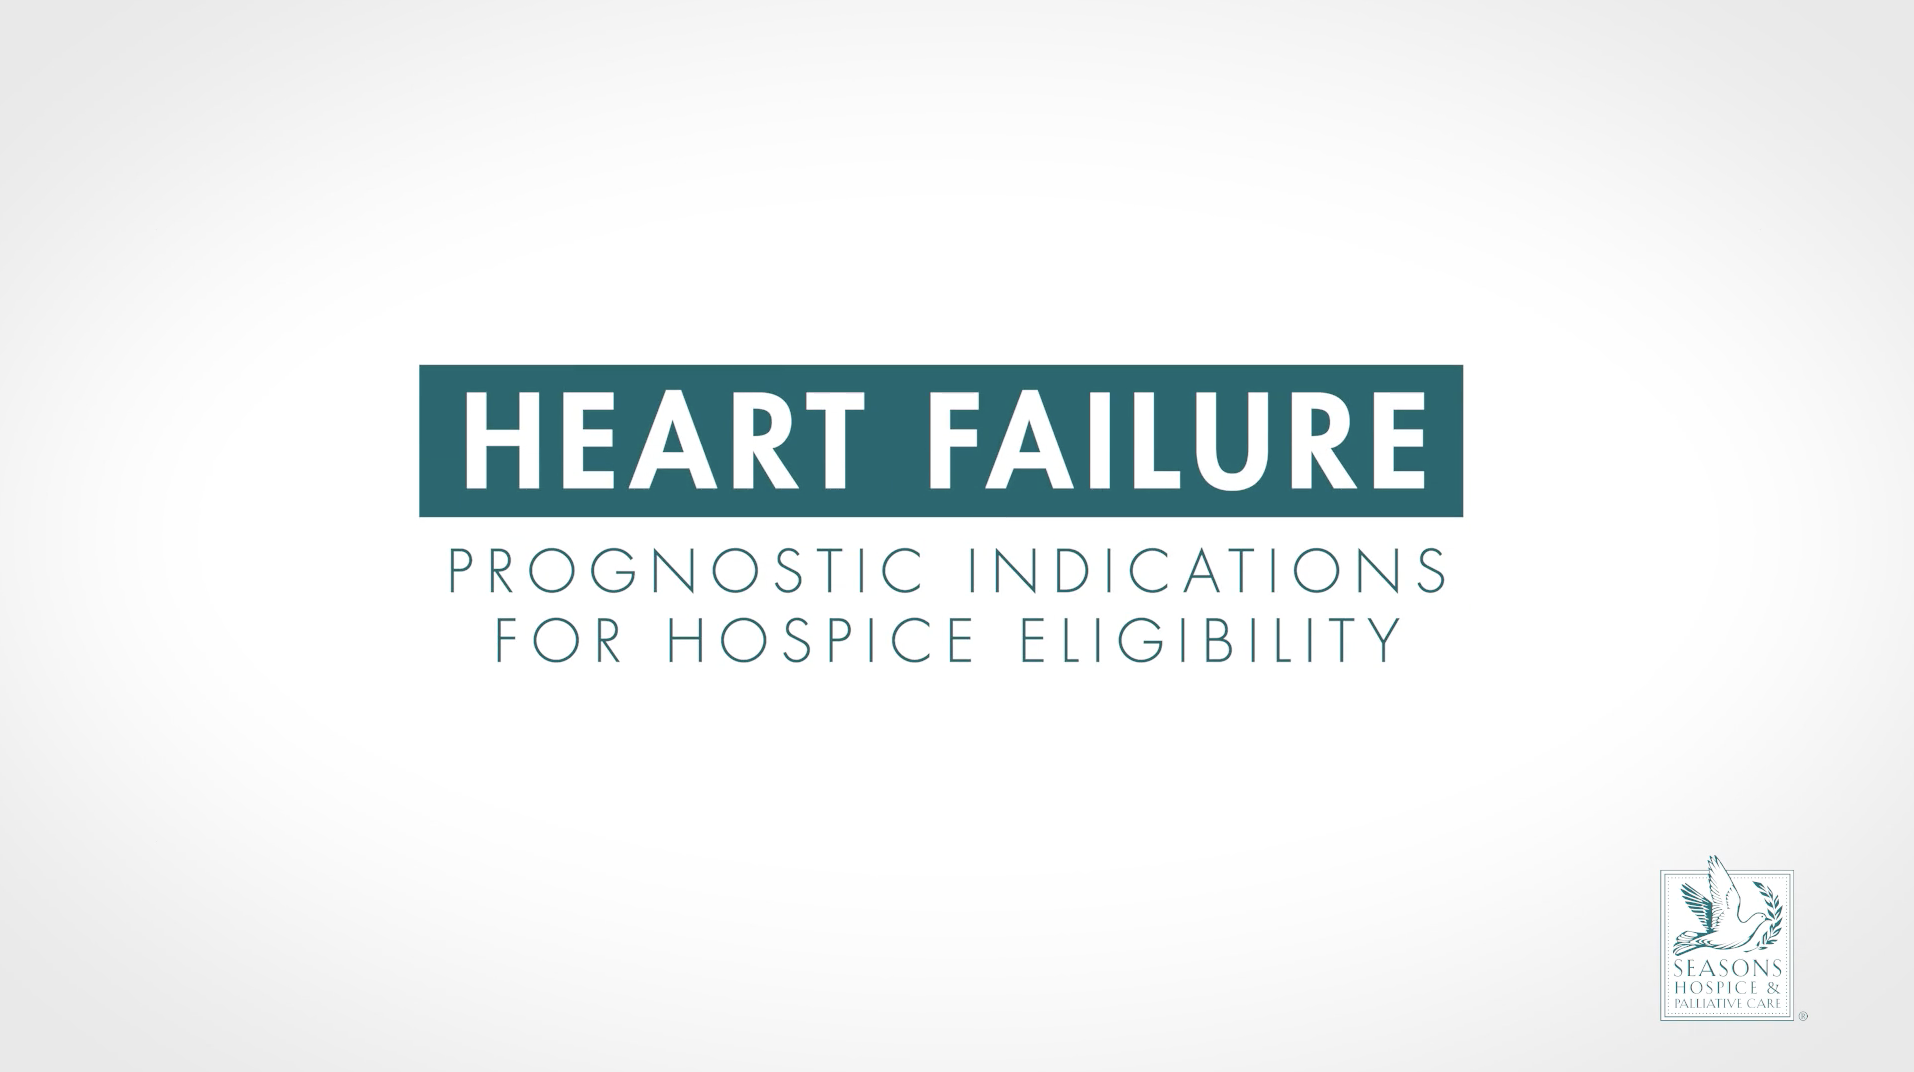 When is a patient with congestive heart failure ready for hospice?